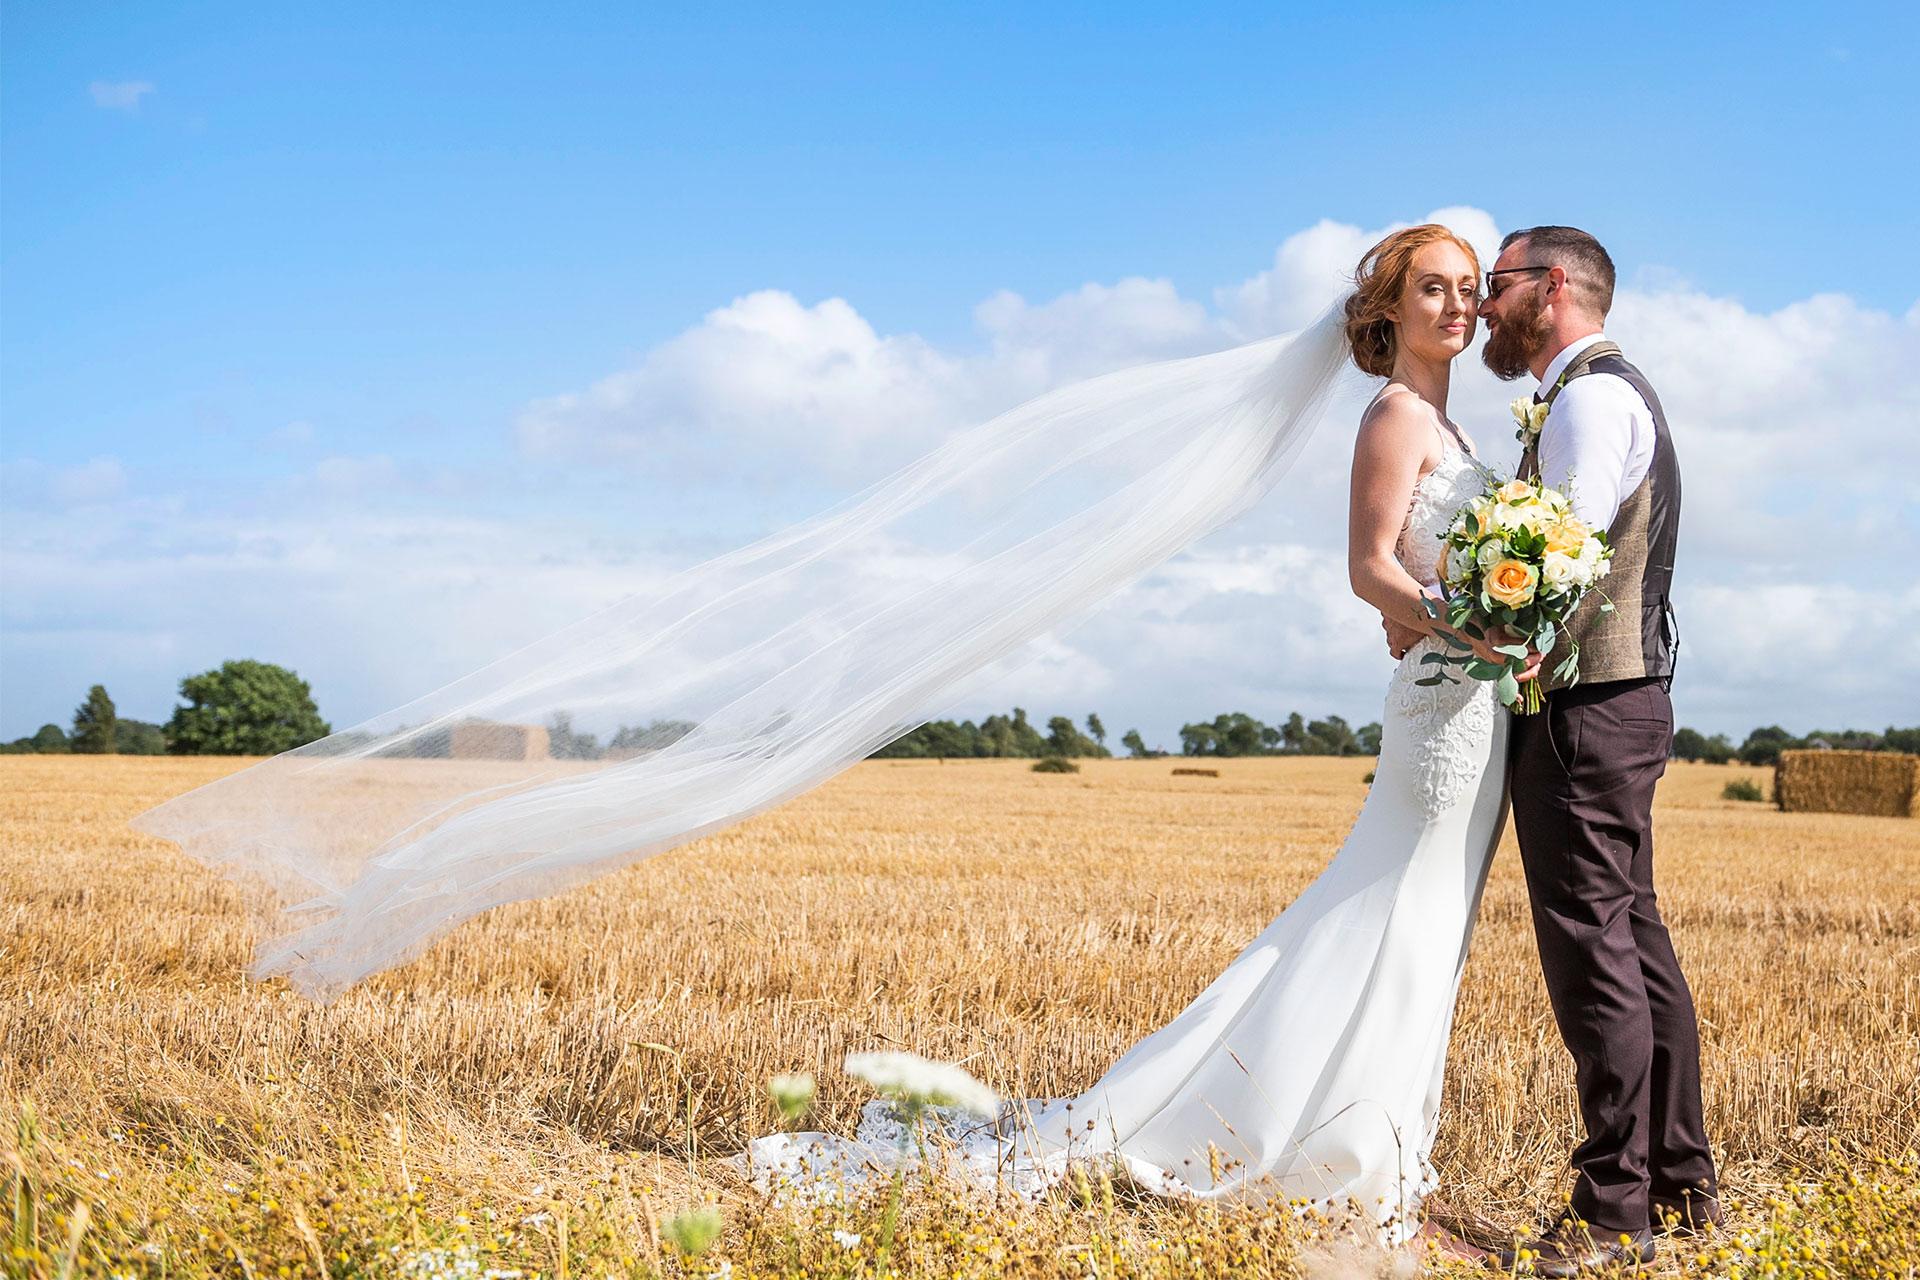 Wedding Photography Hertfordshire, Essex and surrounding locations